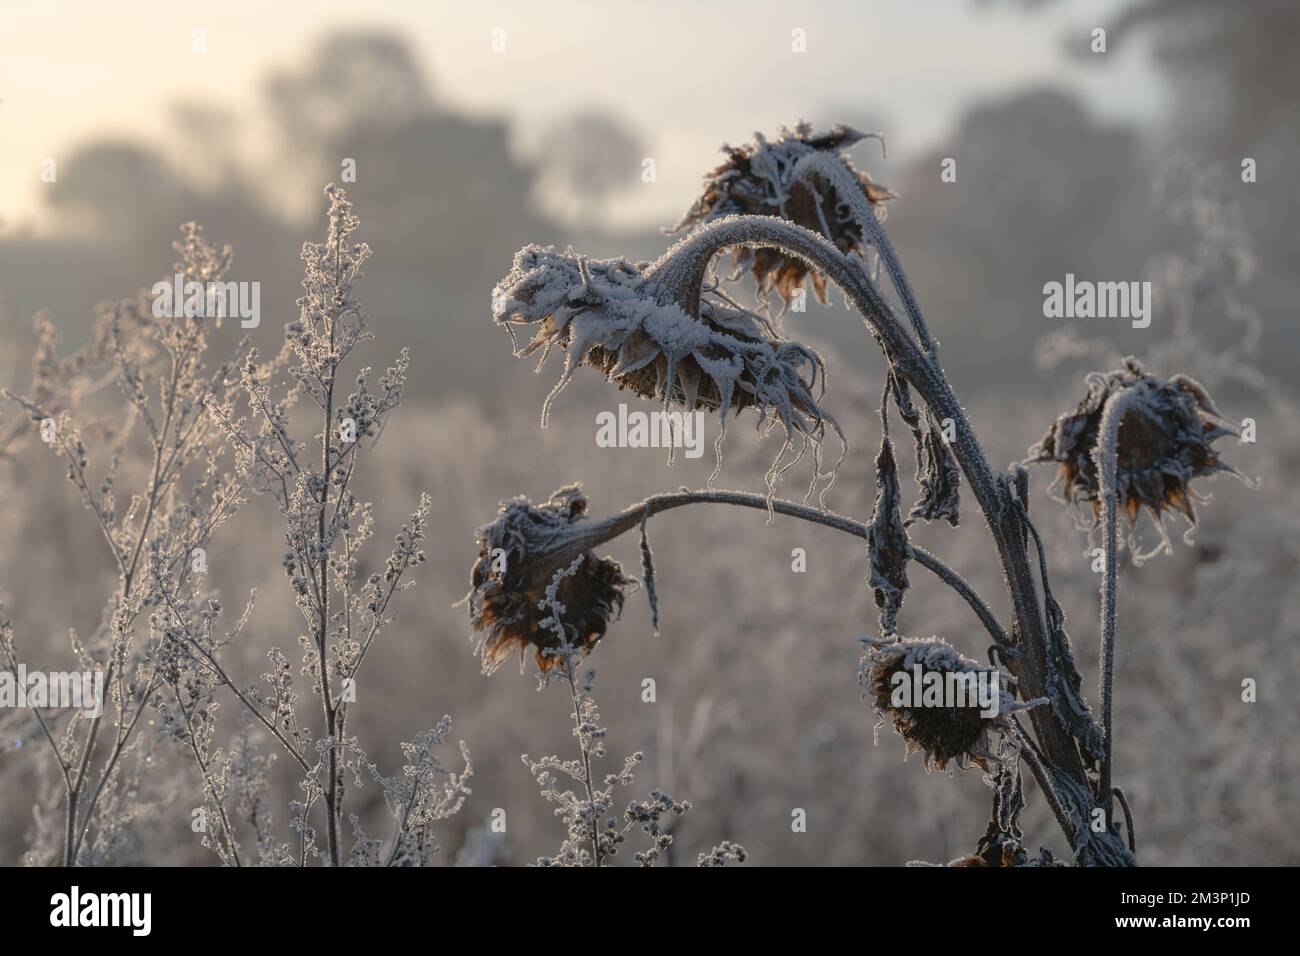 Frozen dead, withered sunflowers in warm, morning light. Hoar frost on sunflowers. Feathery frost. Stock Photo